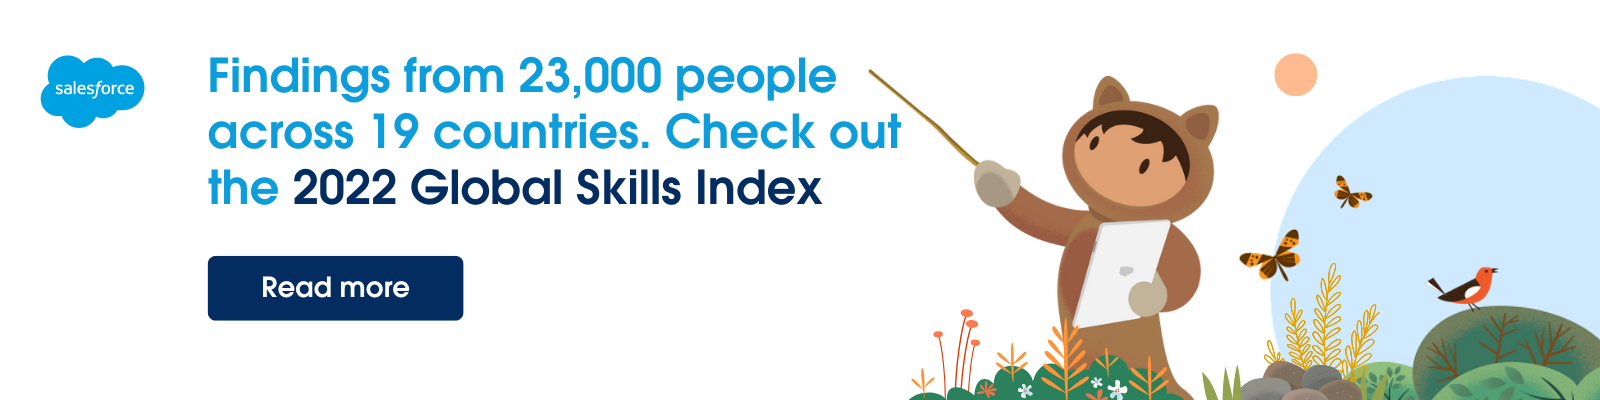 Findings from 23,000 people across 19 countries. Check out the 2022 Global Skills Index.